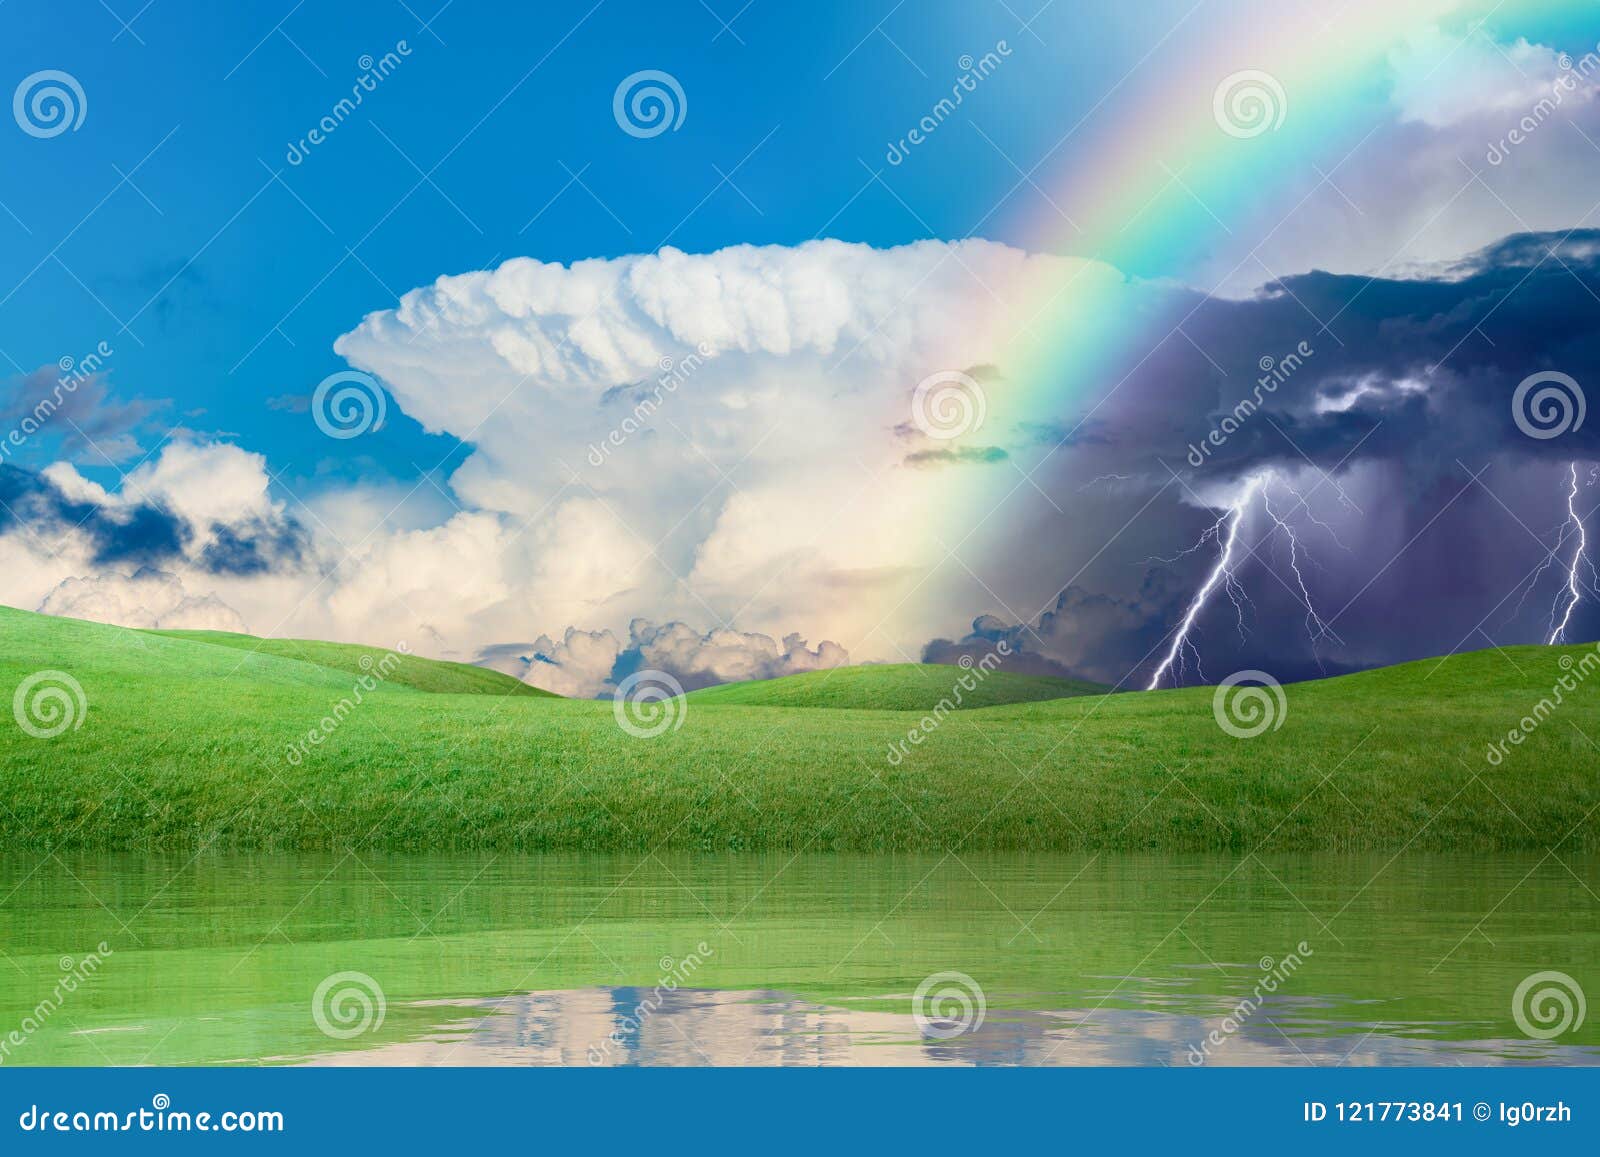 weather forecast concept with colorful rainbow and lightnings